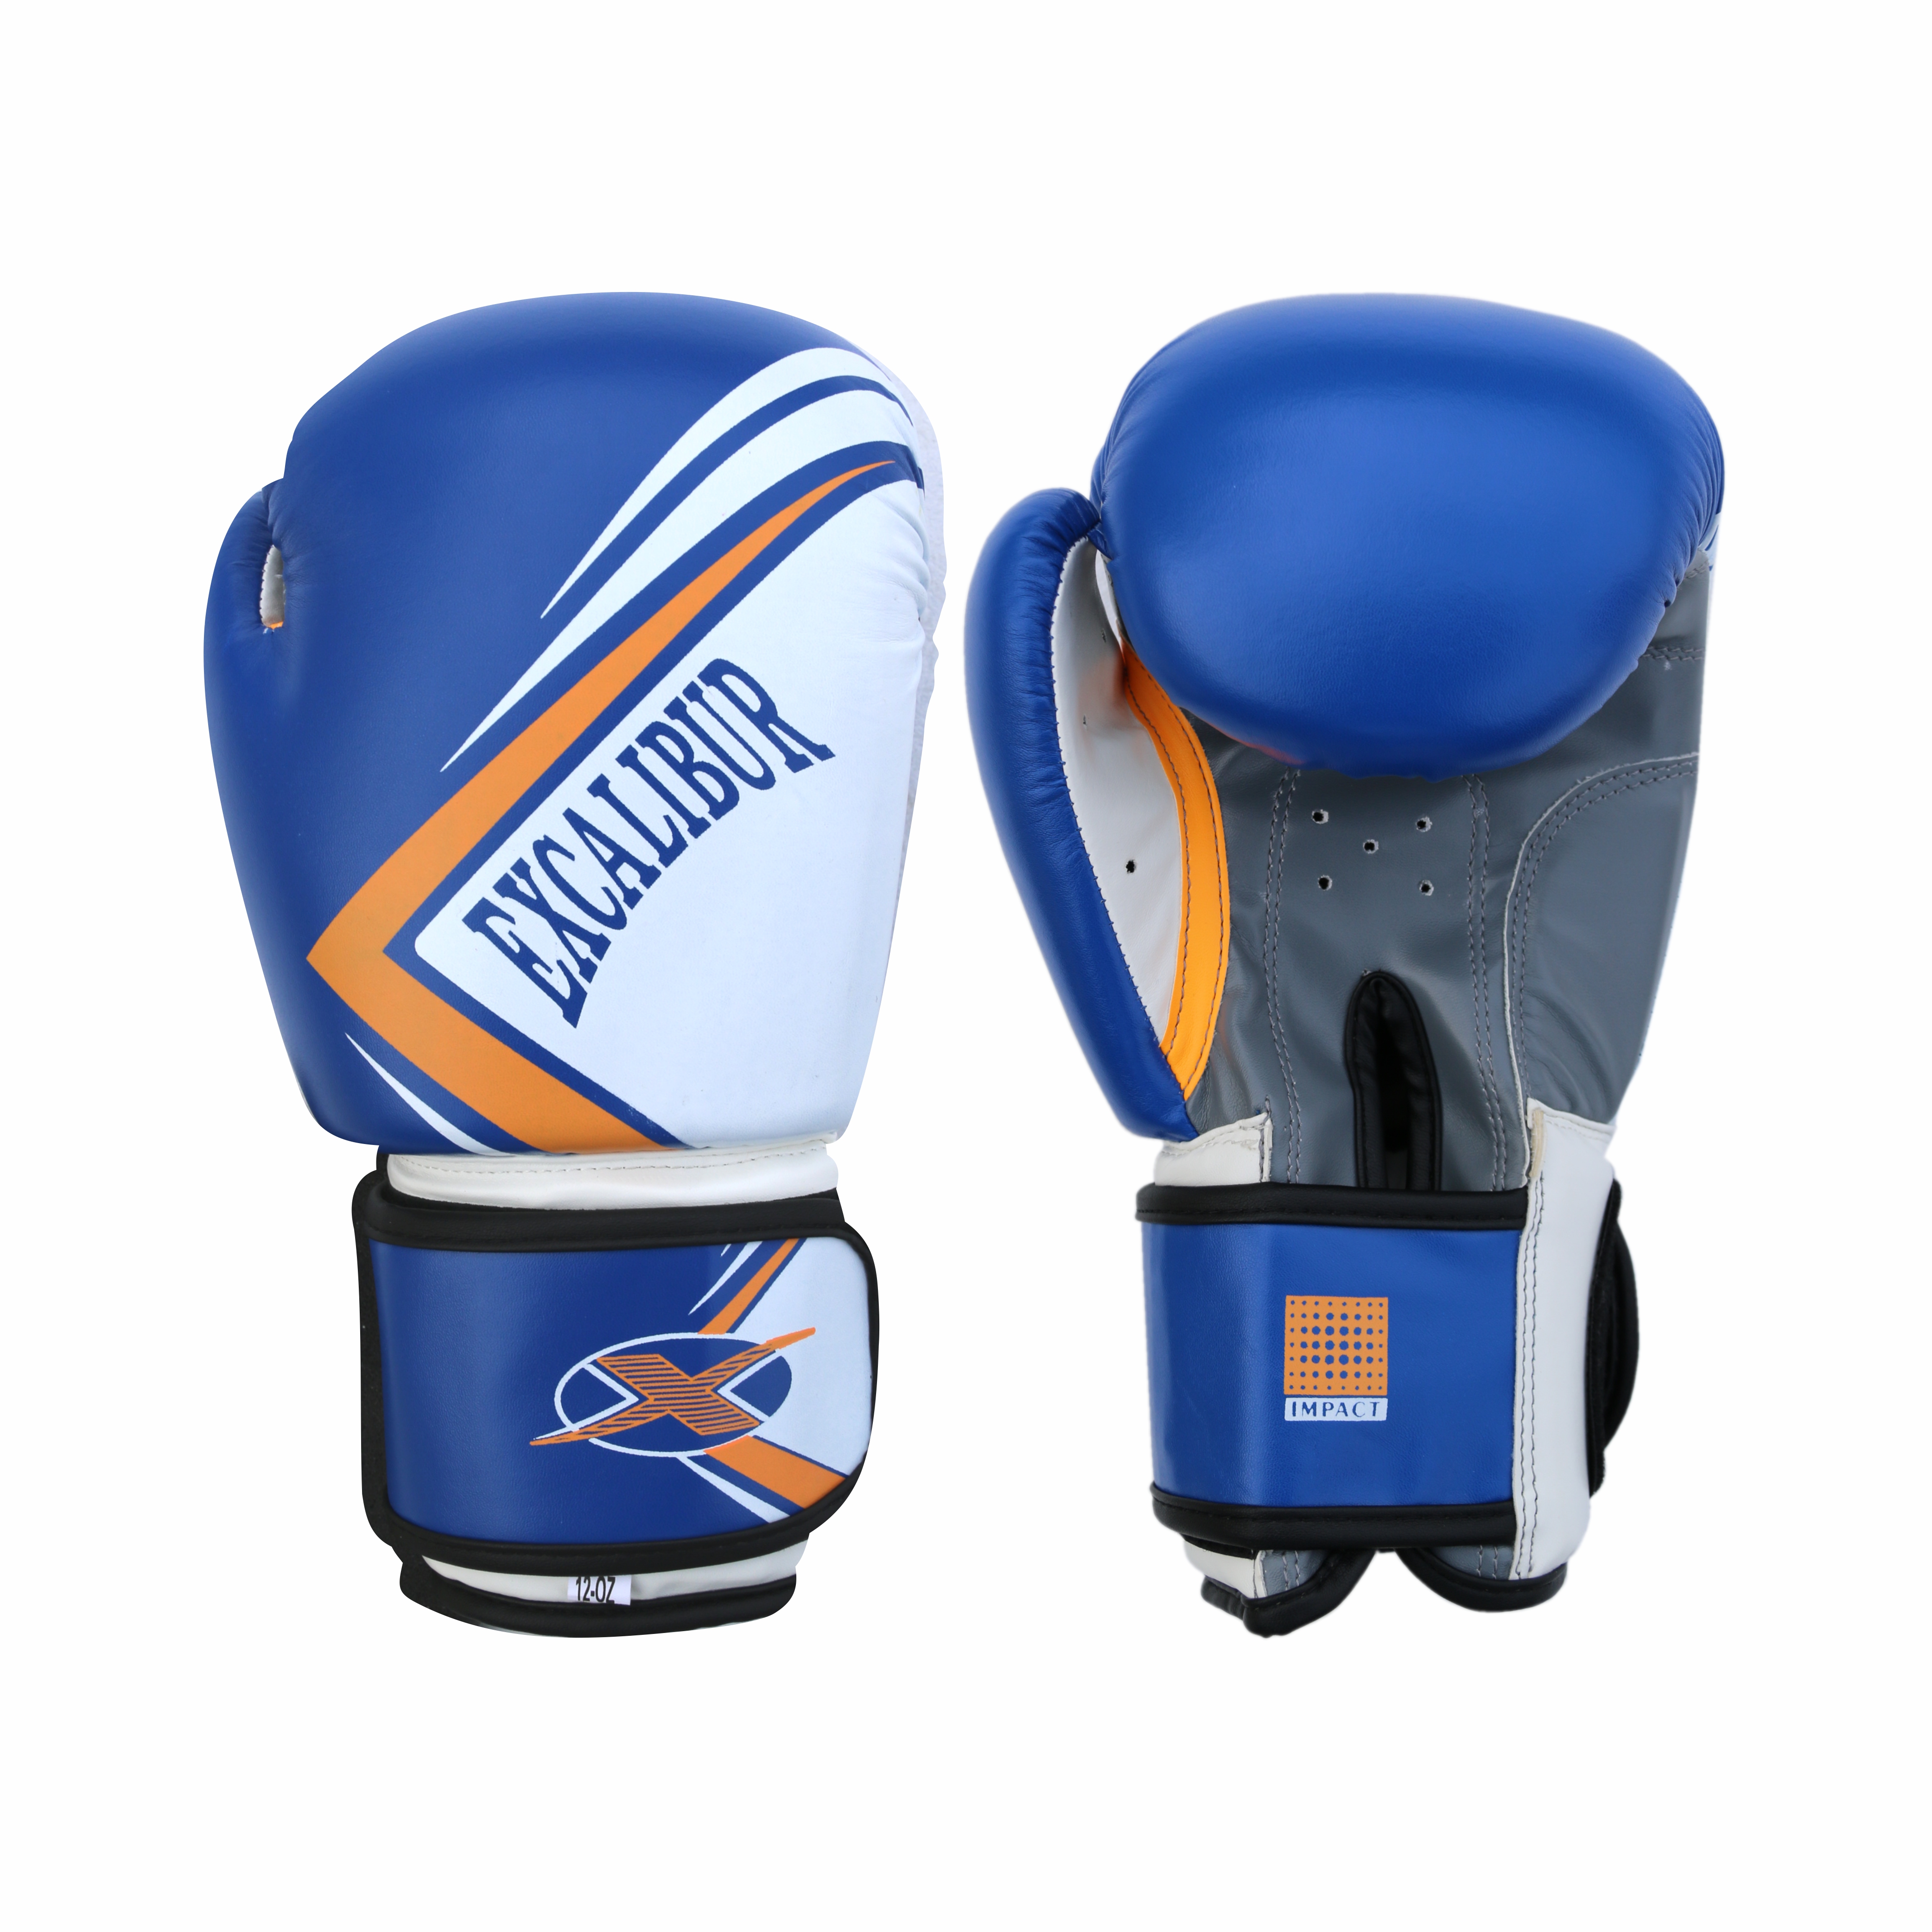 Dn-2000 Boxing Gloves